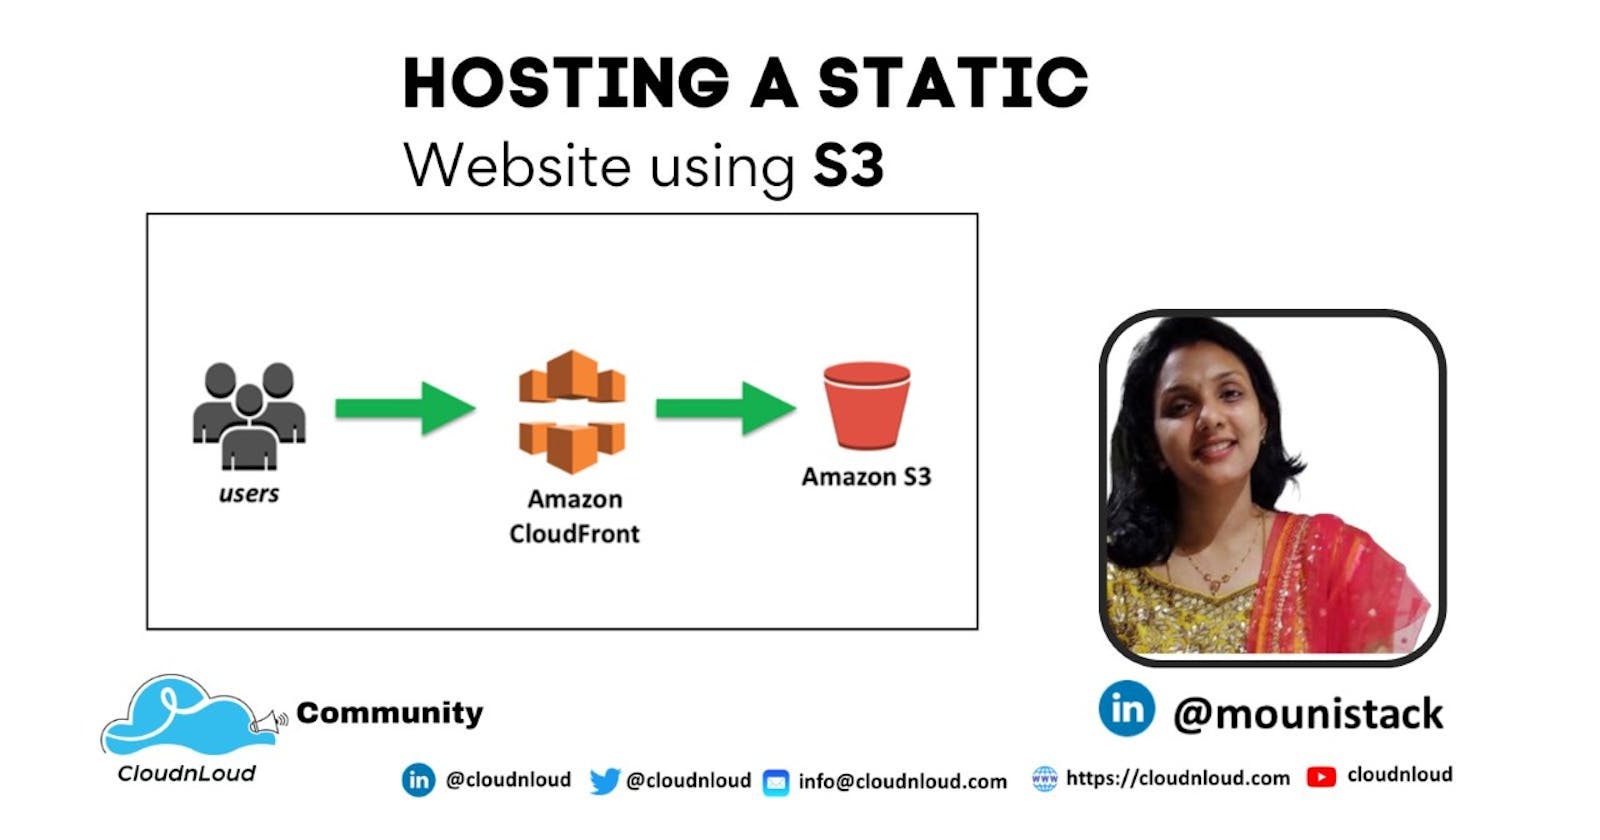 How to host a static website using Amazon S3